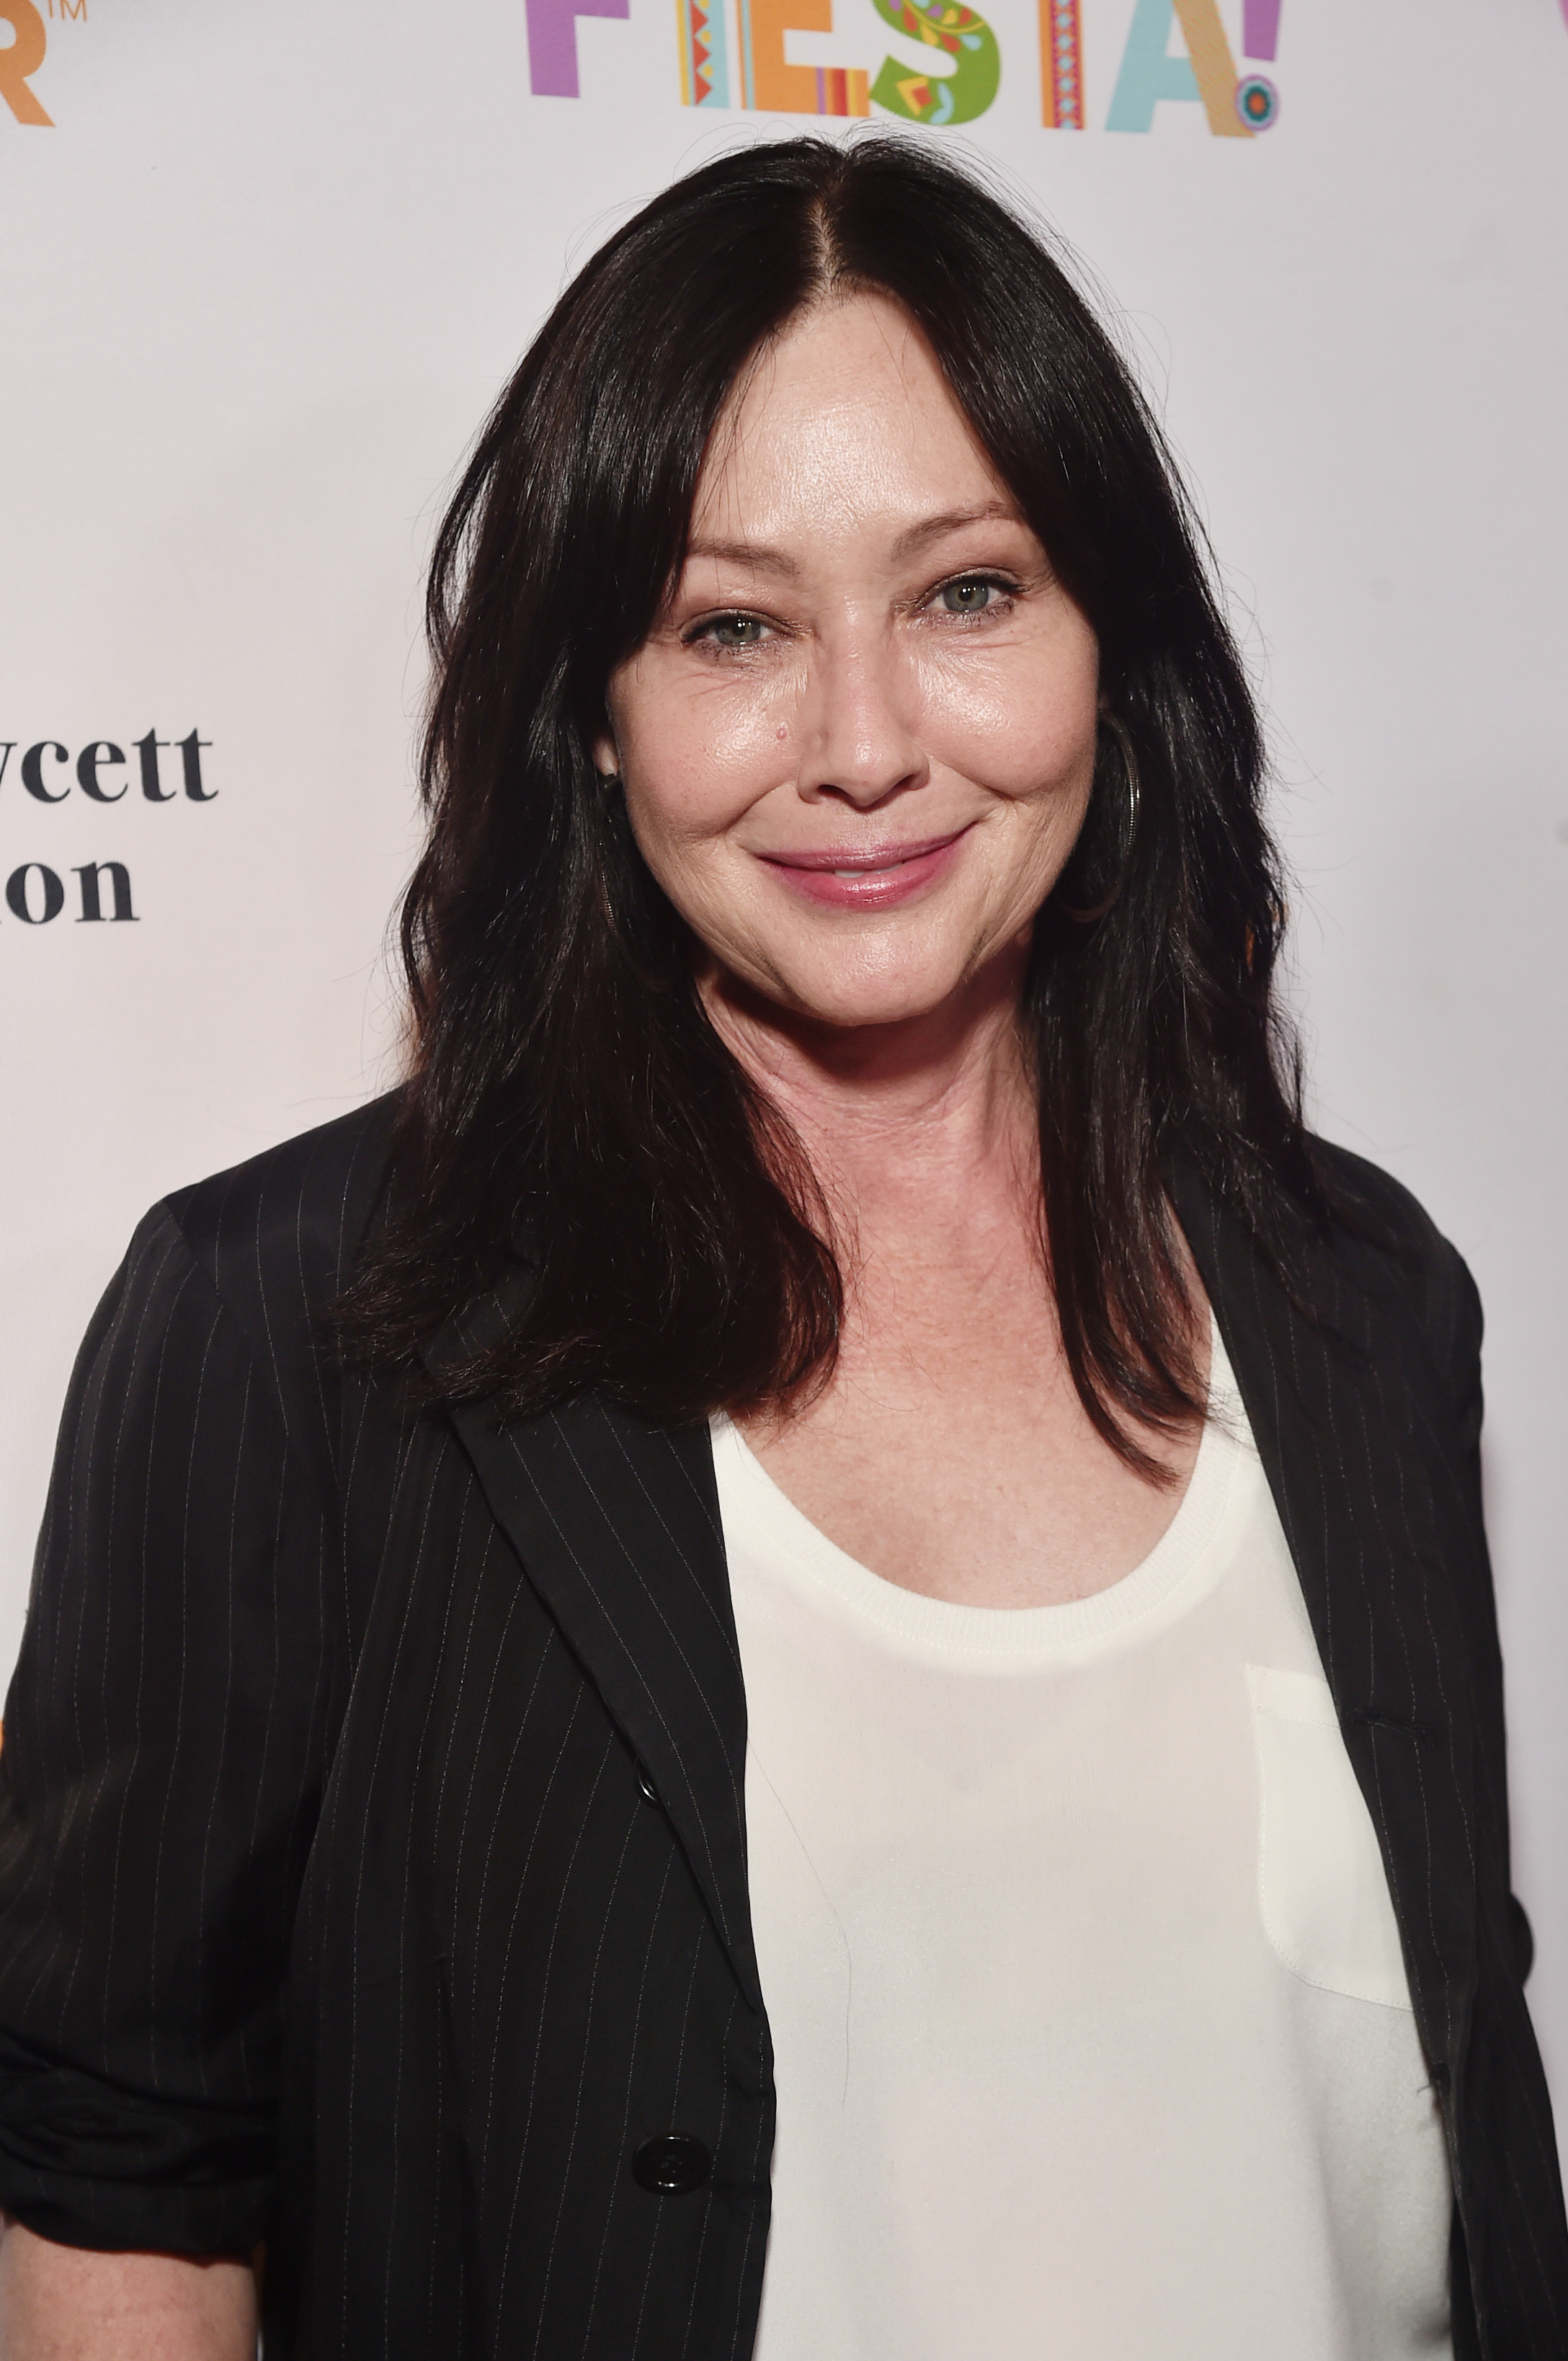 Shannen Doherty in Los Angeles in 2019 | Source: Getty Images